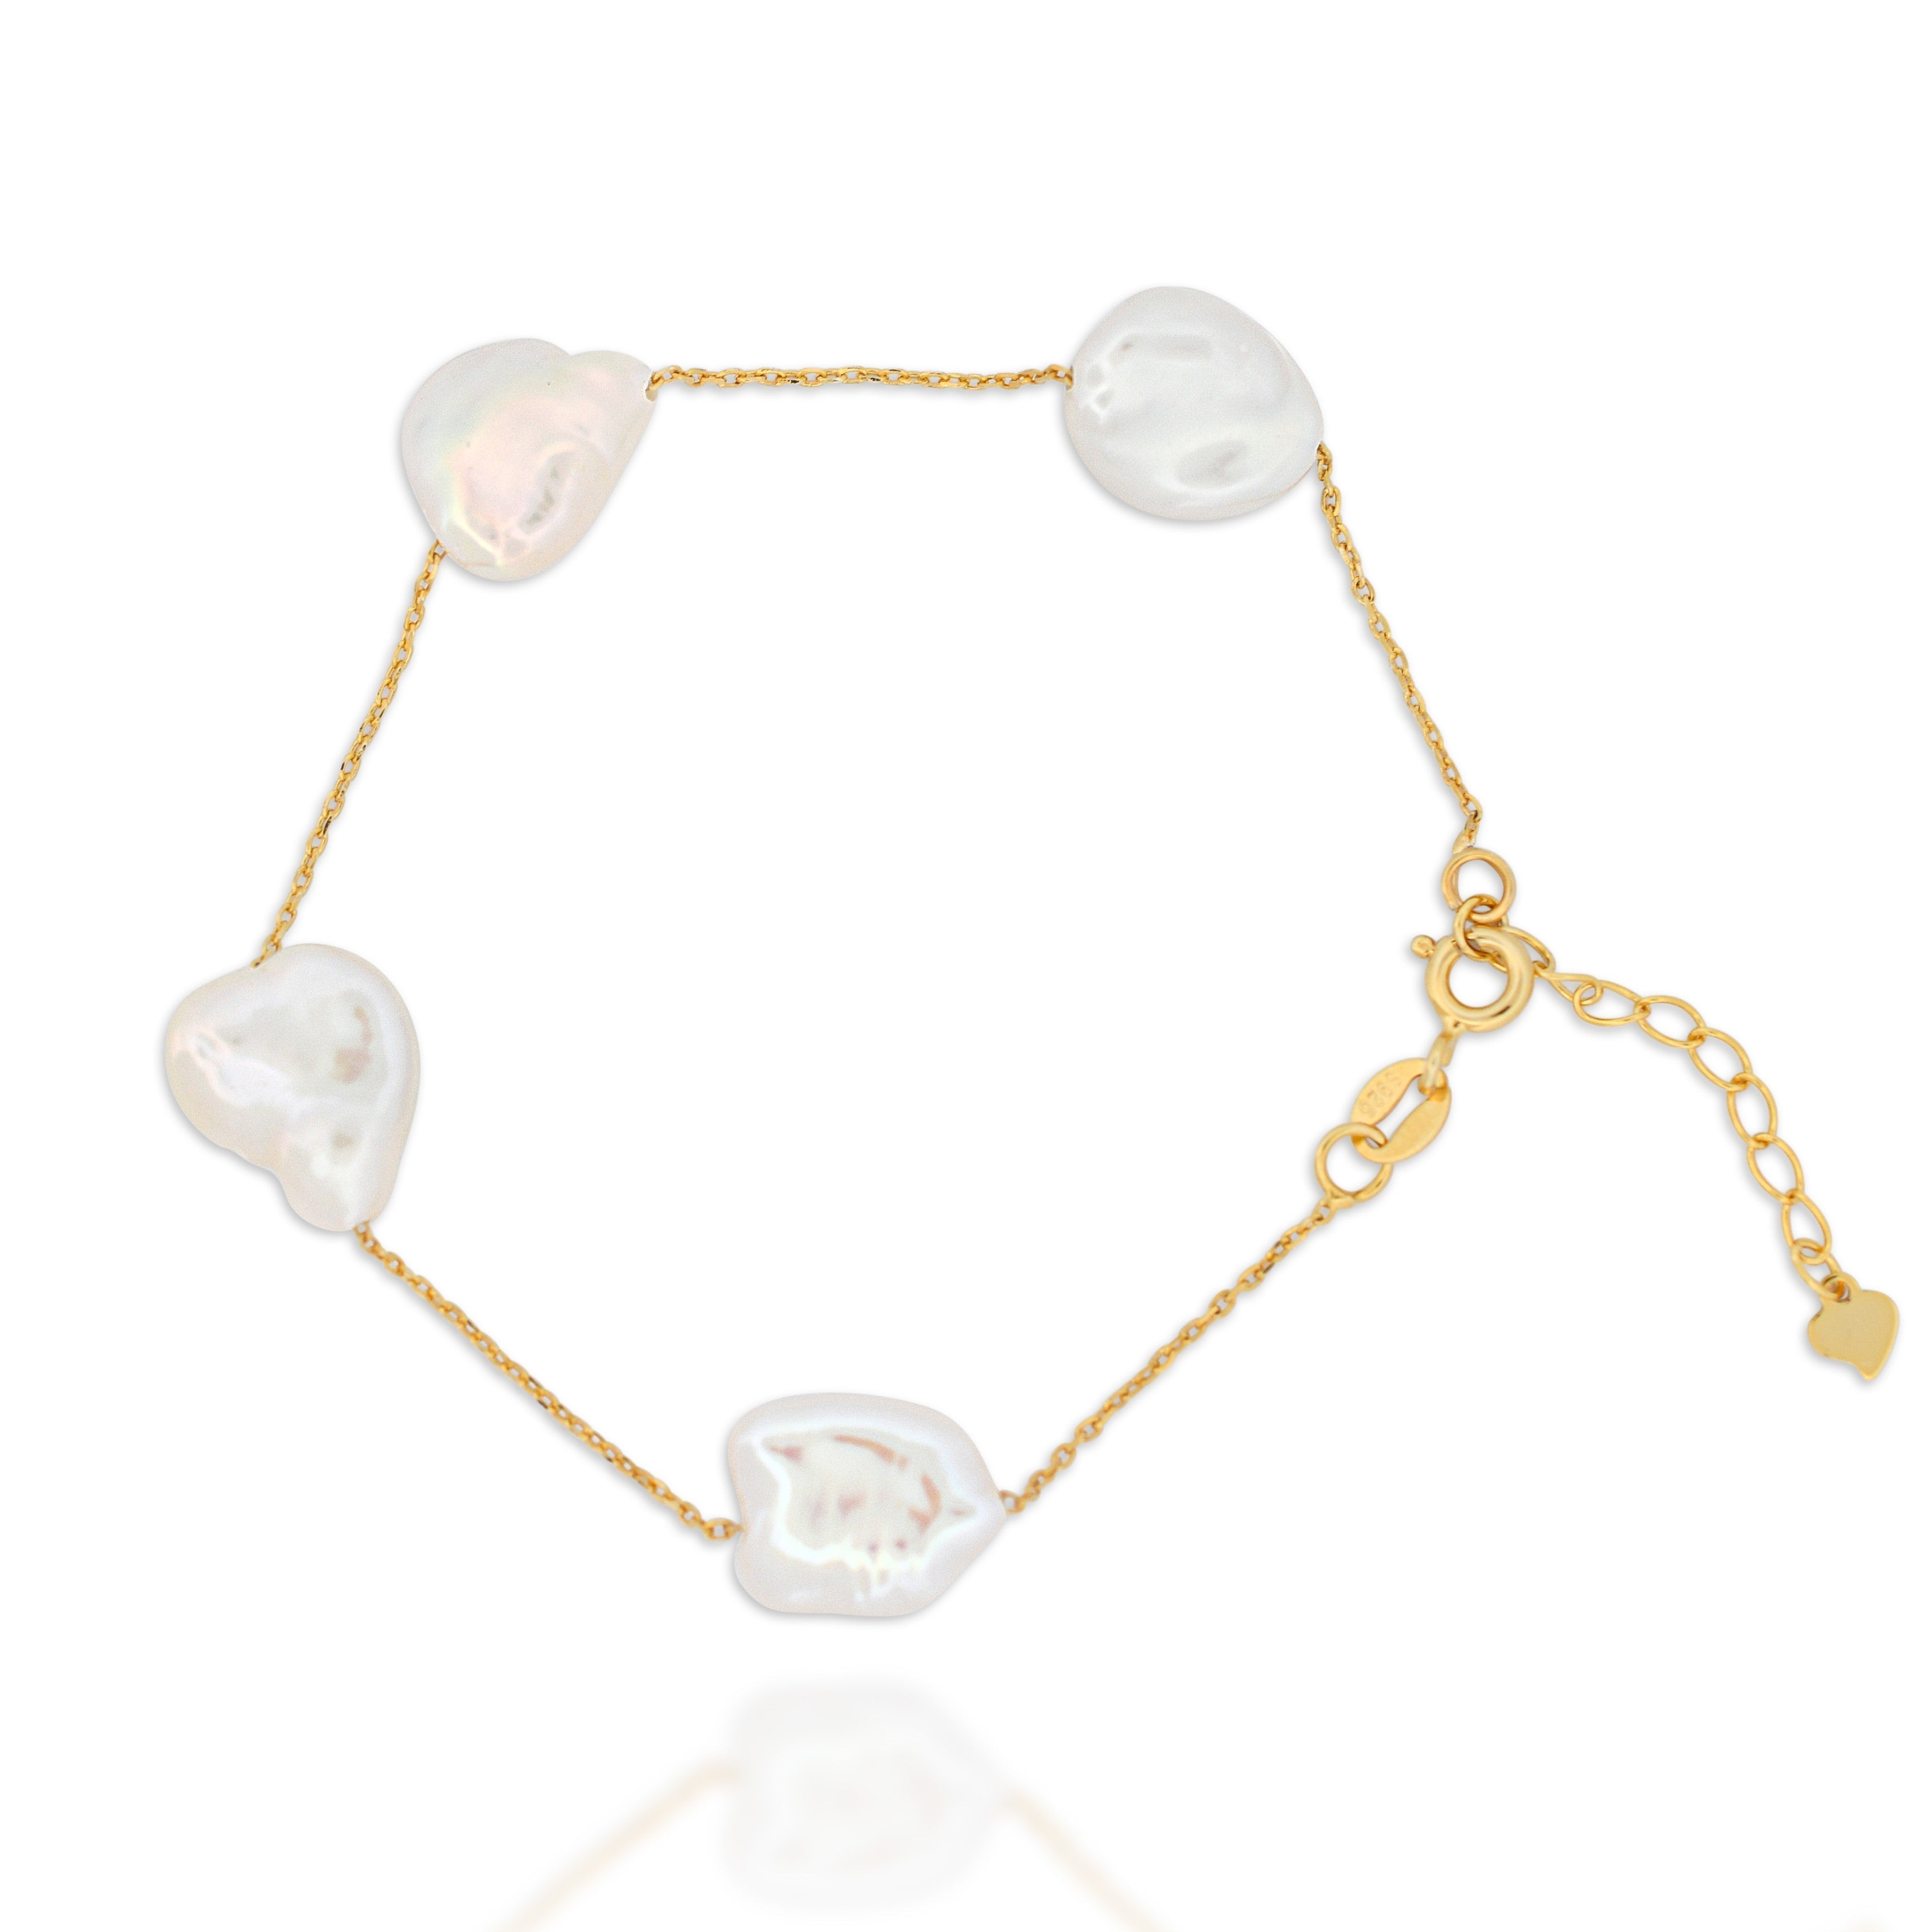 Floating Keshi Pearl Bracelet in 18ct Yellow Gold Plated Sterling Silver